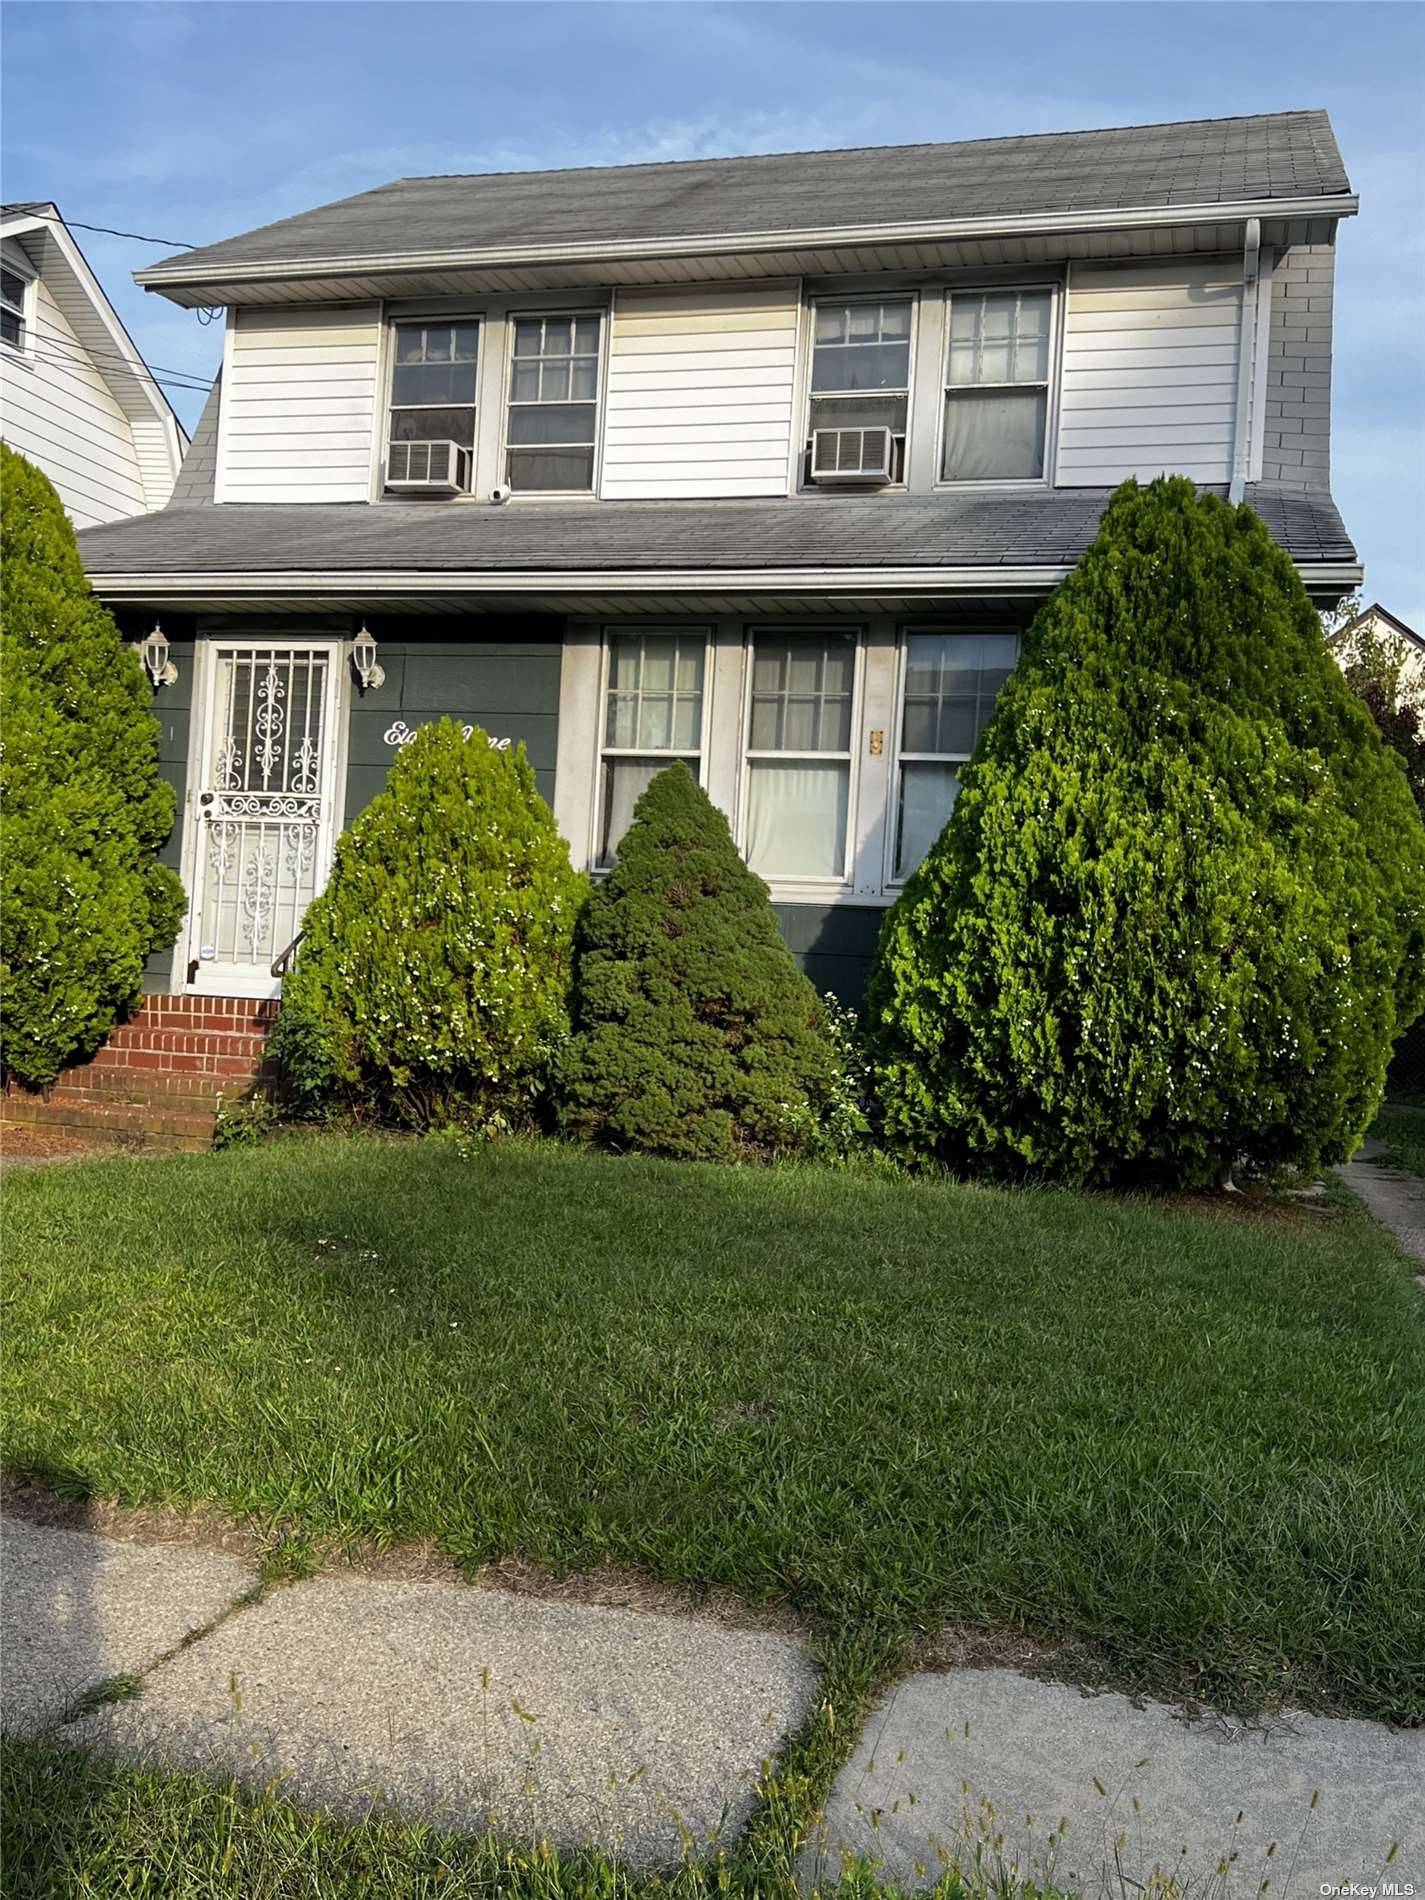 SHORT SALE 3 BEDROOM COLONIAL WITH GREAT POTENTIAL !